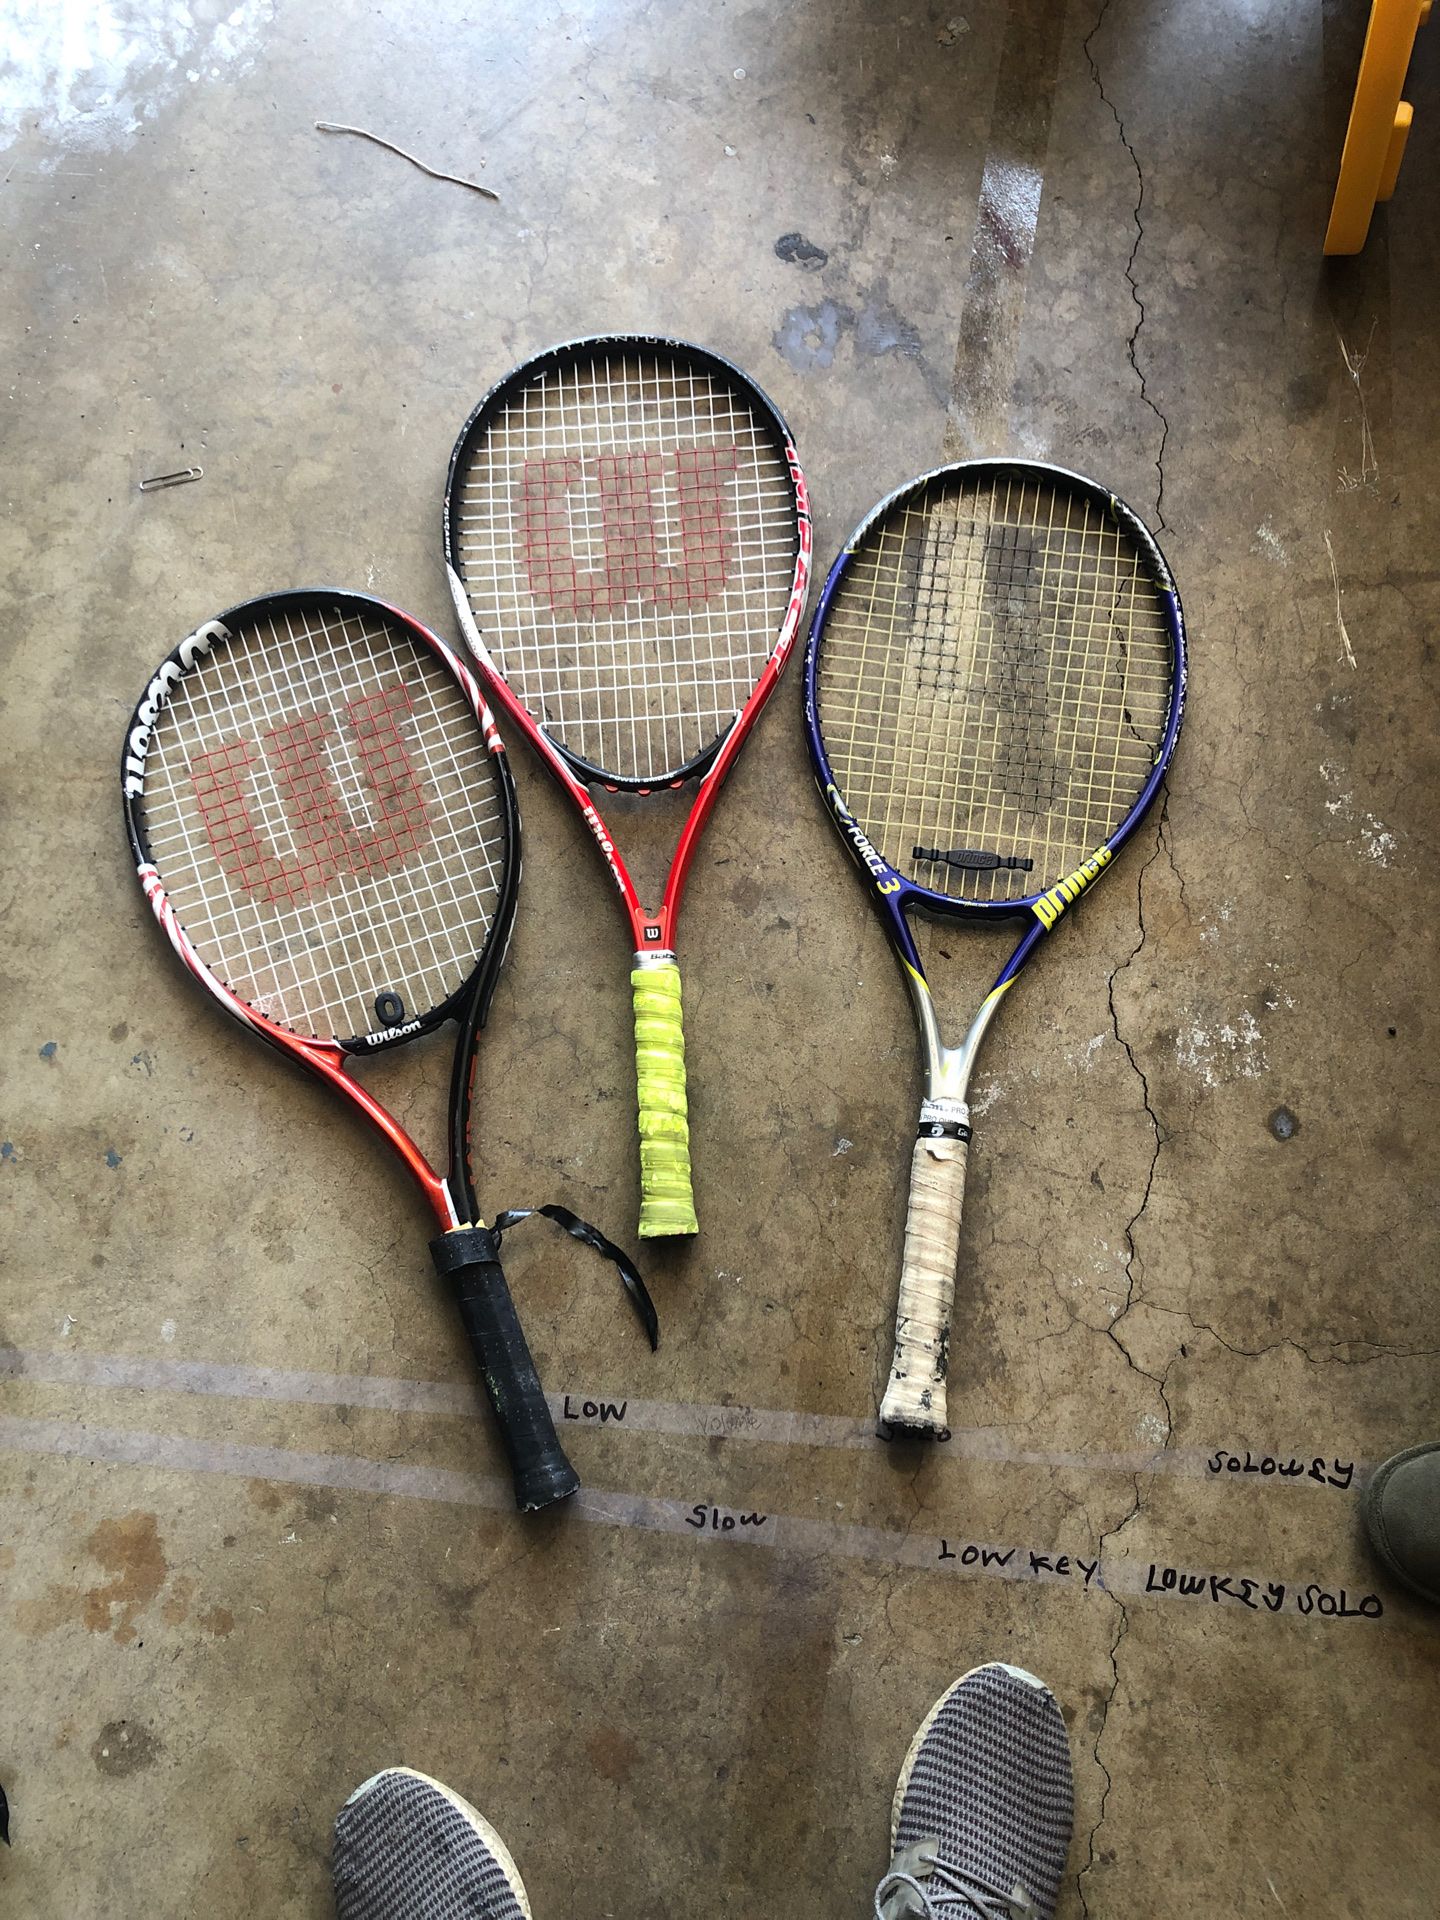 Tennis racket $40 for 3